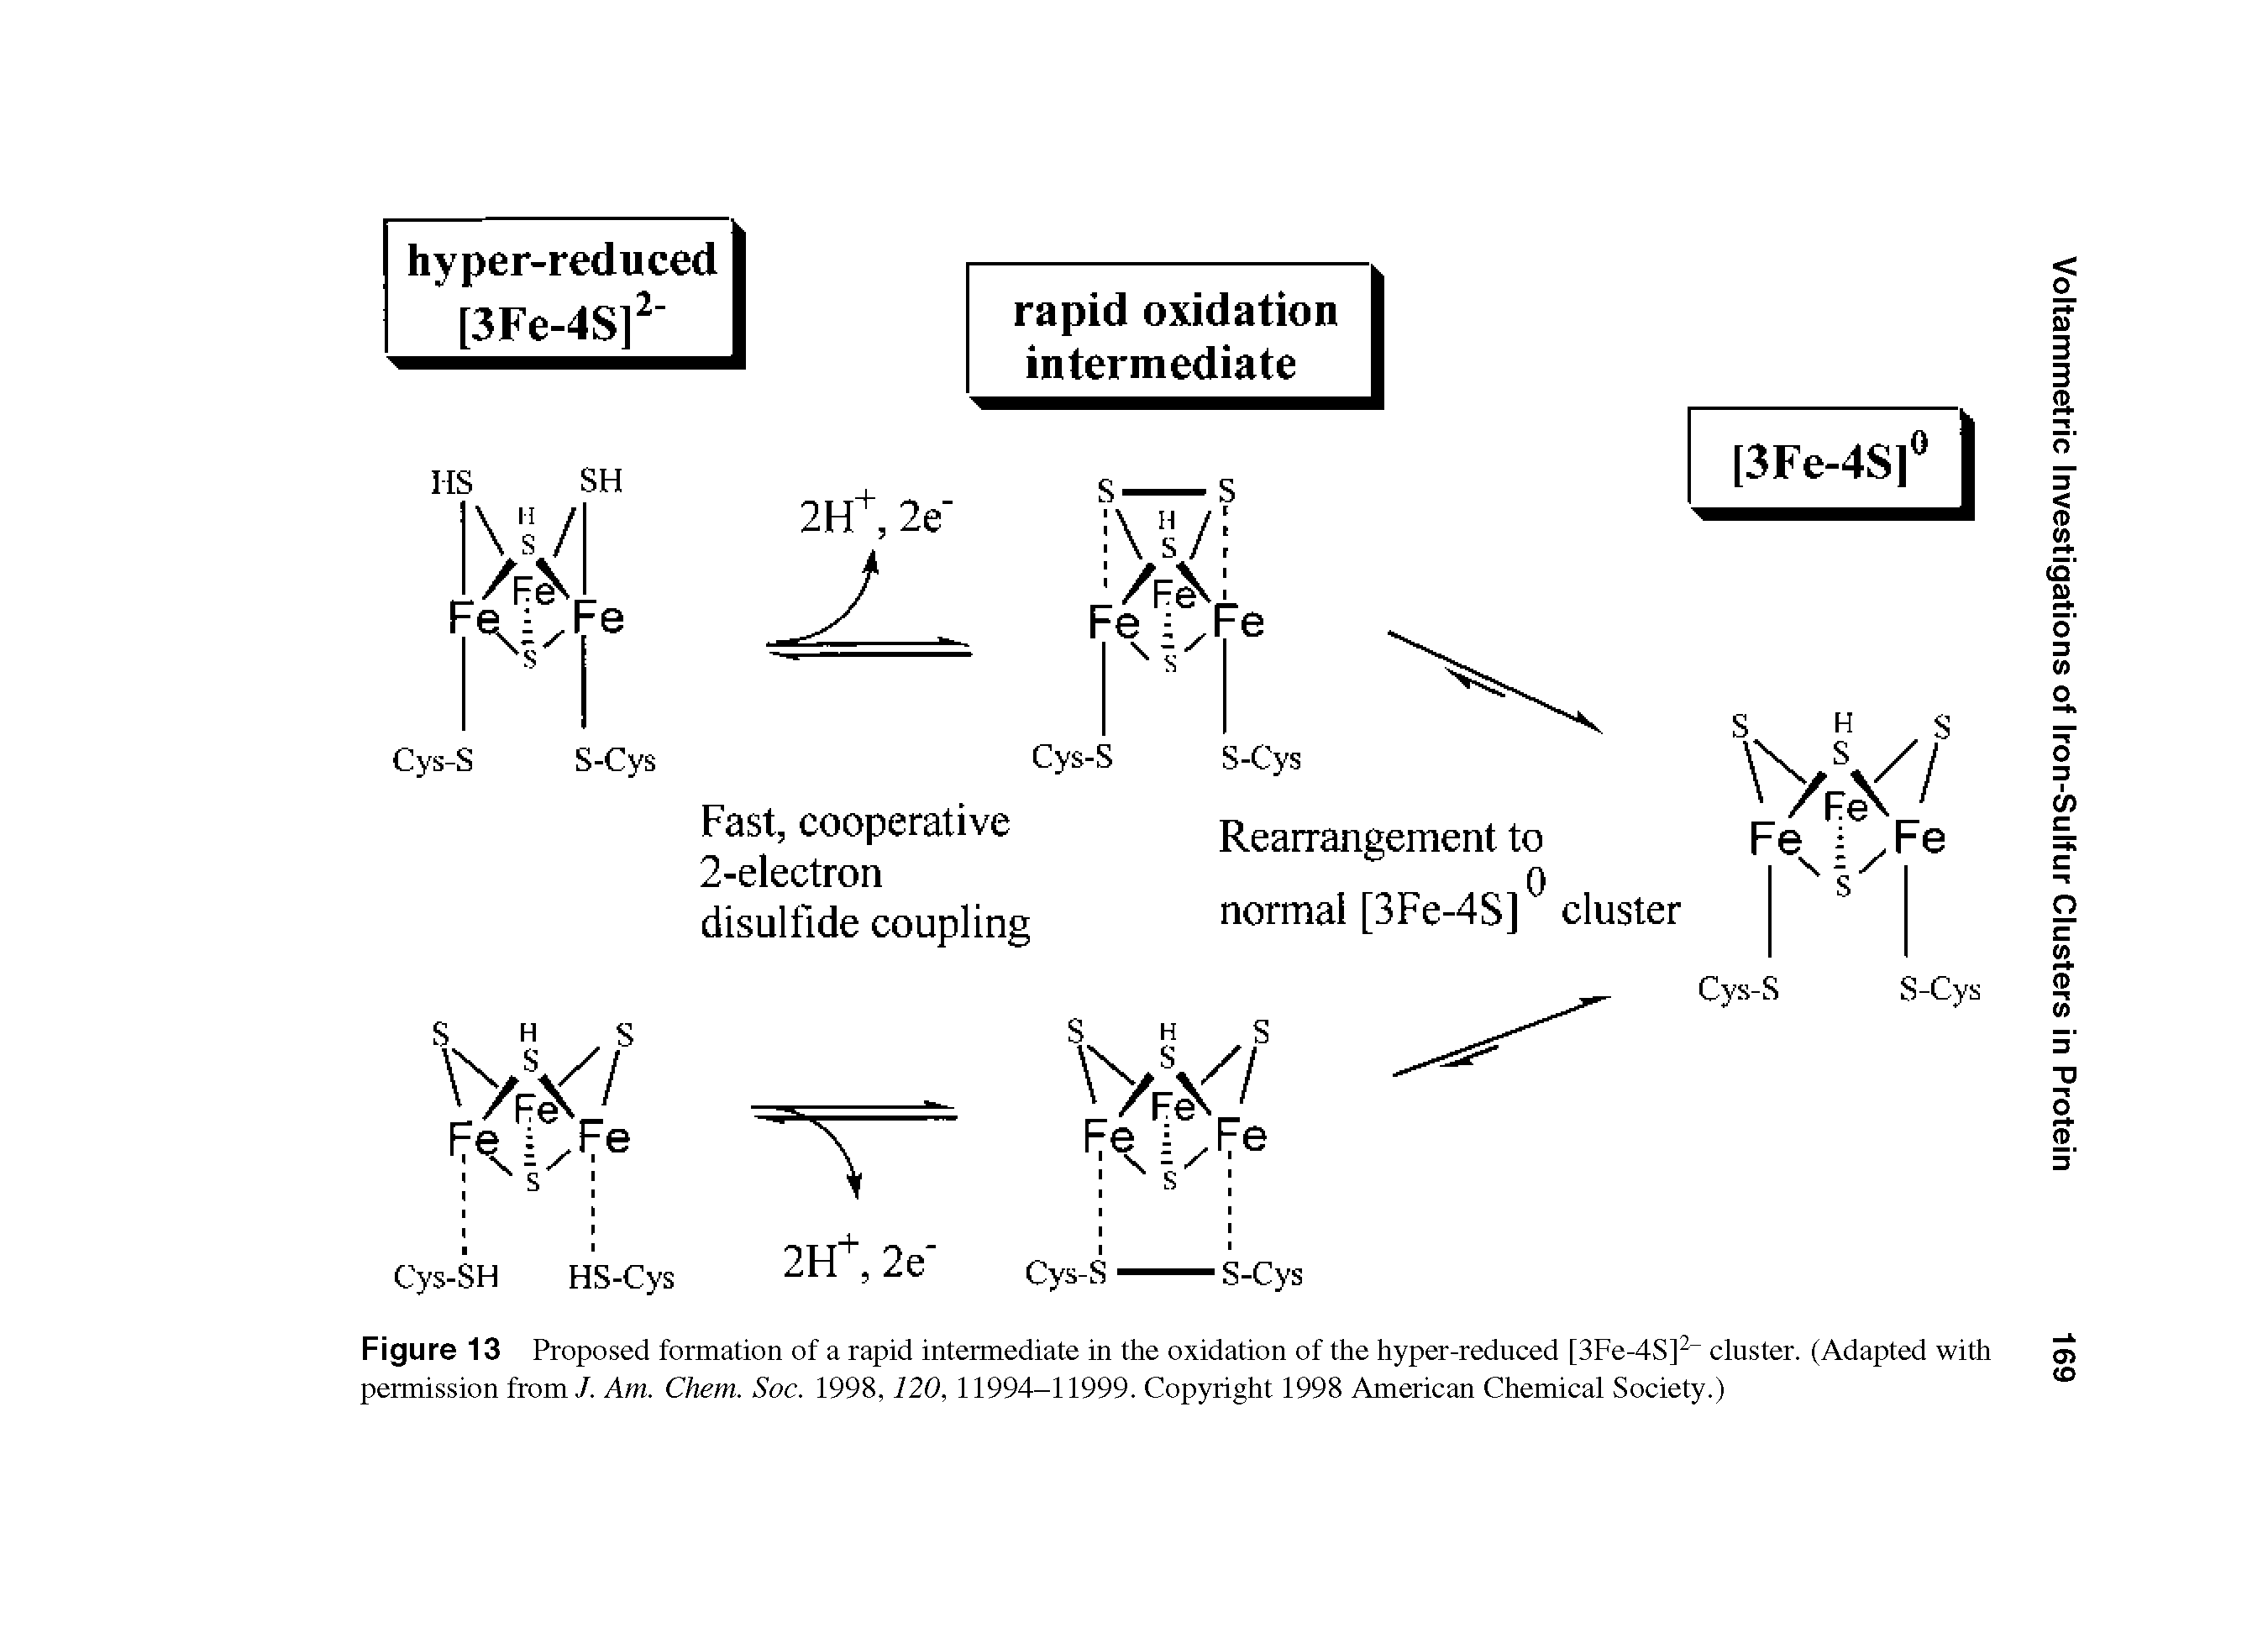 Figure 13 Proposed formation of a rapid intermediate in the oxidation of the hyper-reduced [3Fe-4S] cluster. (Adapted with permission from/. Am. Chem. Soc. 1998,120, 11994-11999. Copyright 1998 American Chemical Society.)...